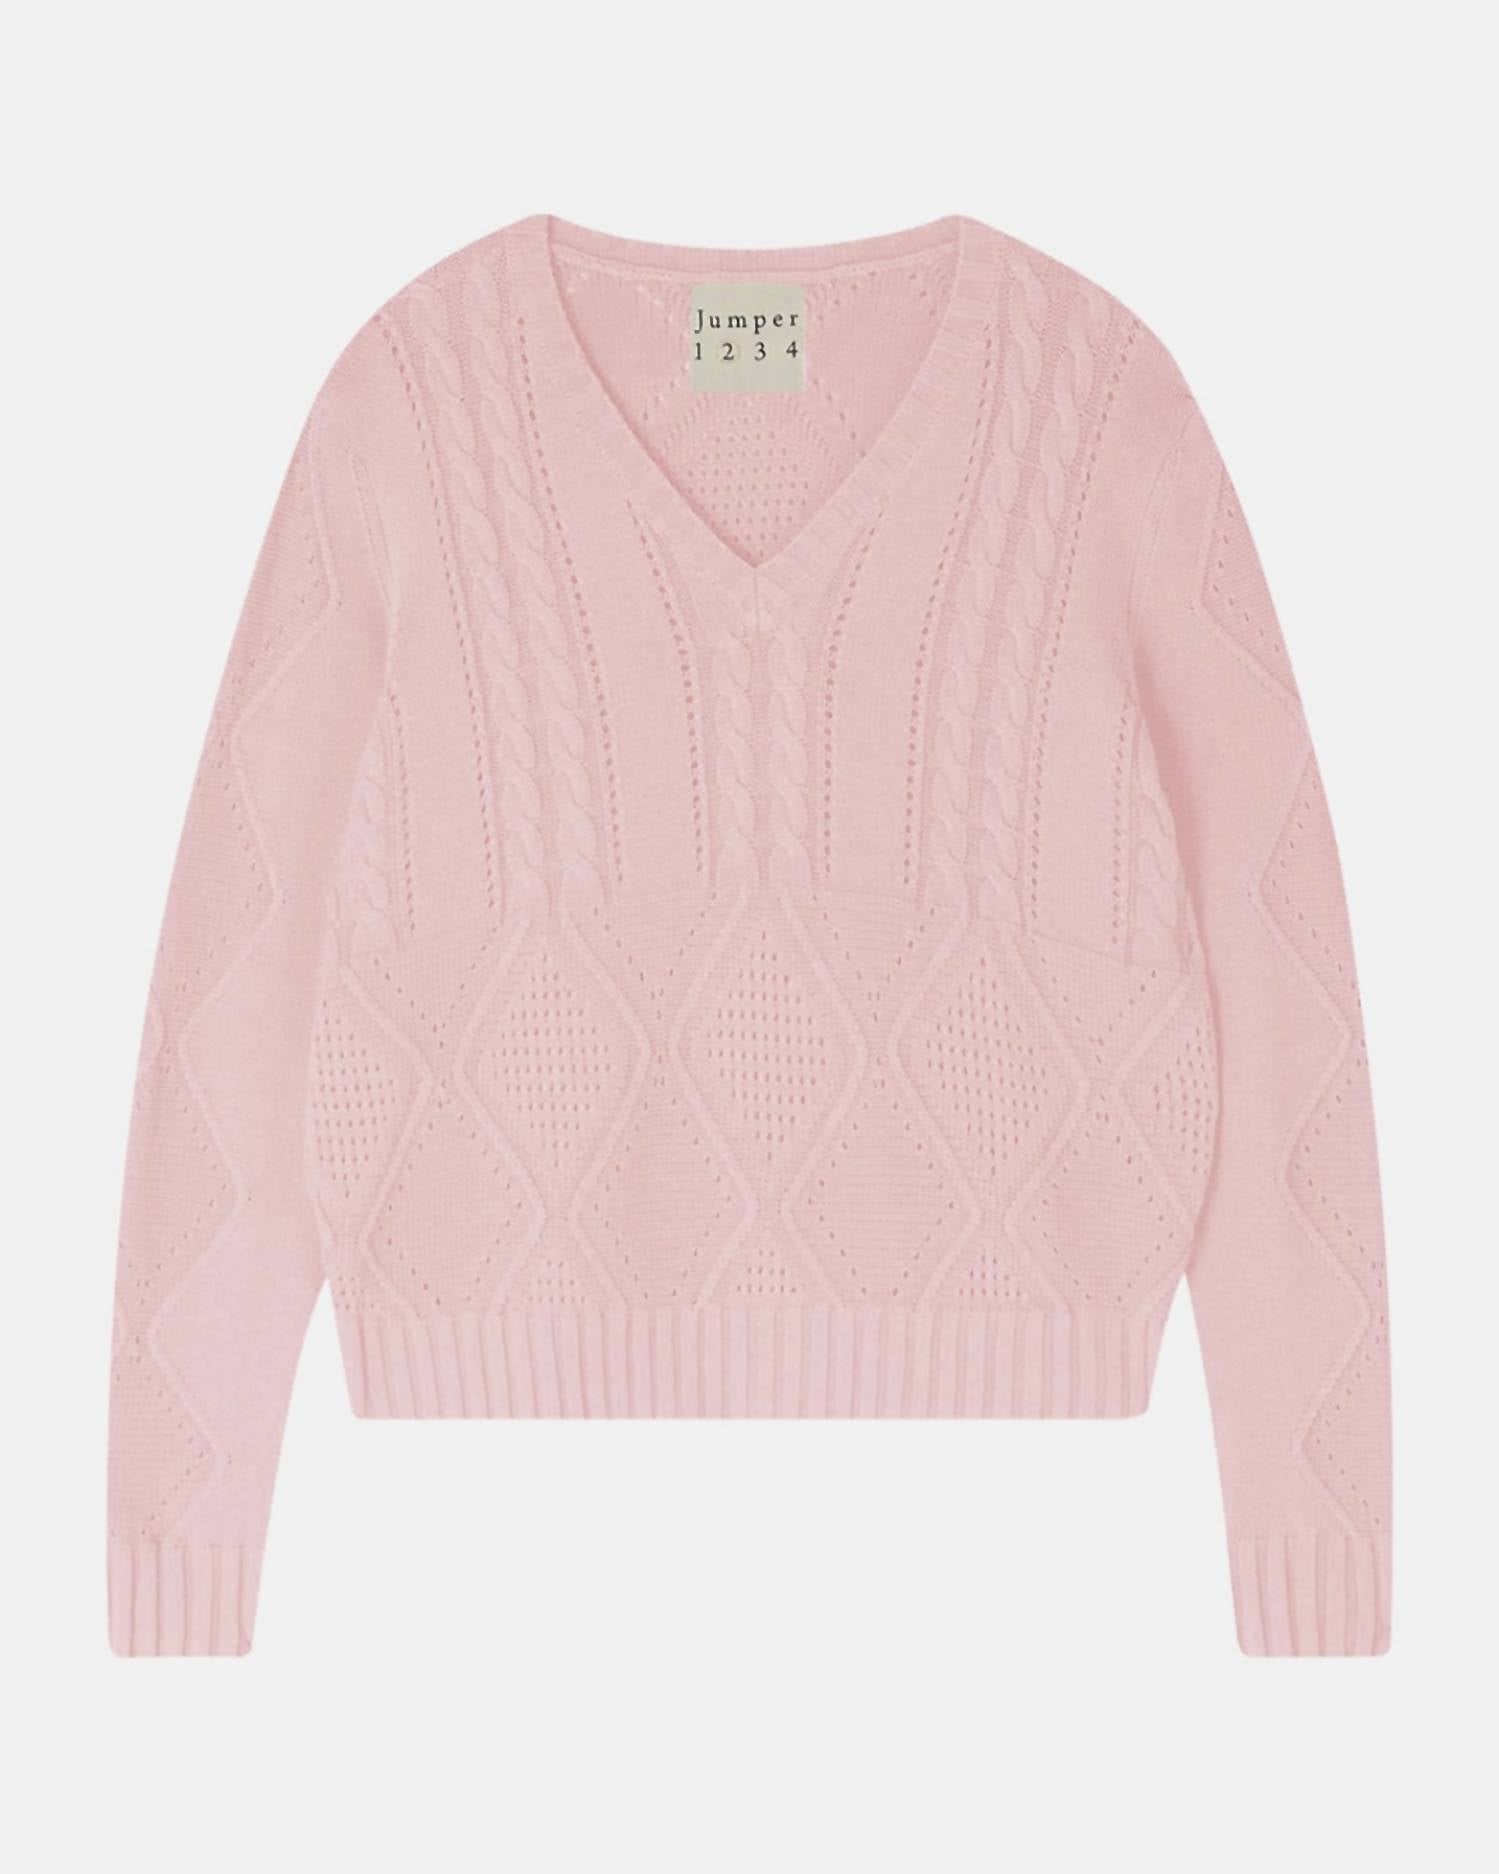 Jumper1234 Mix Texture Sweater In Pale Pink In Multi